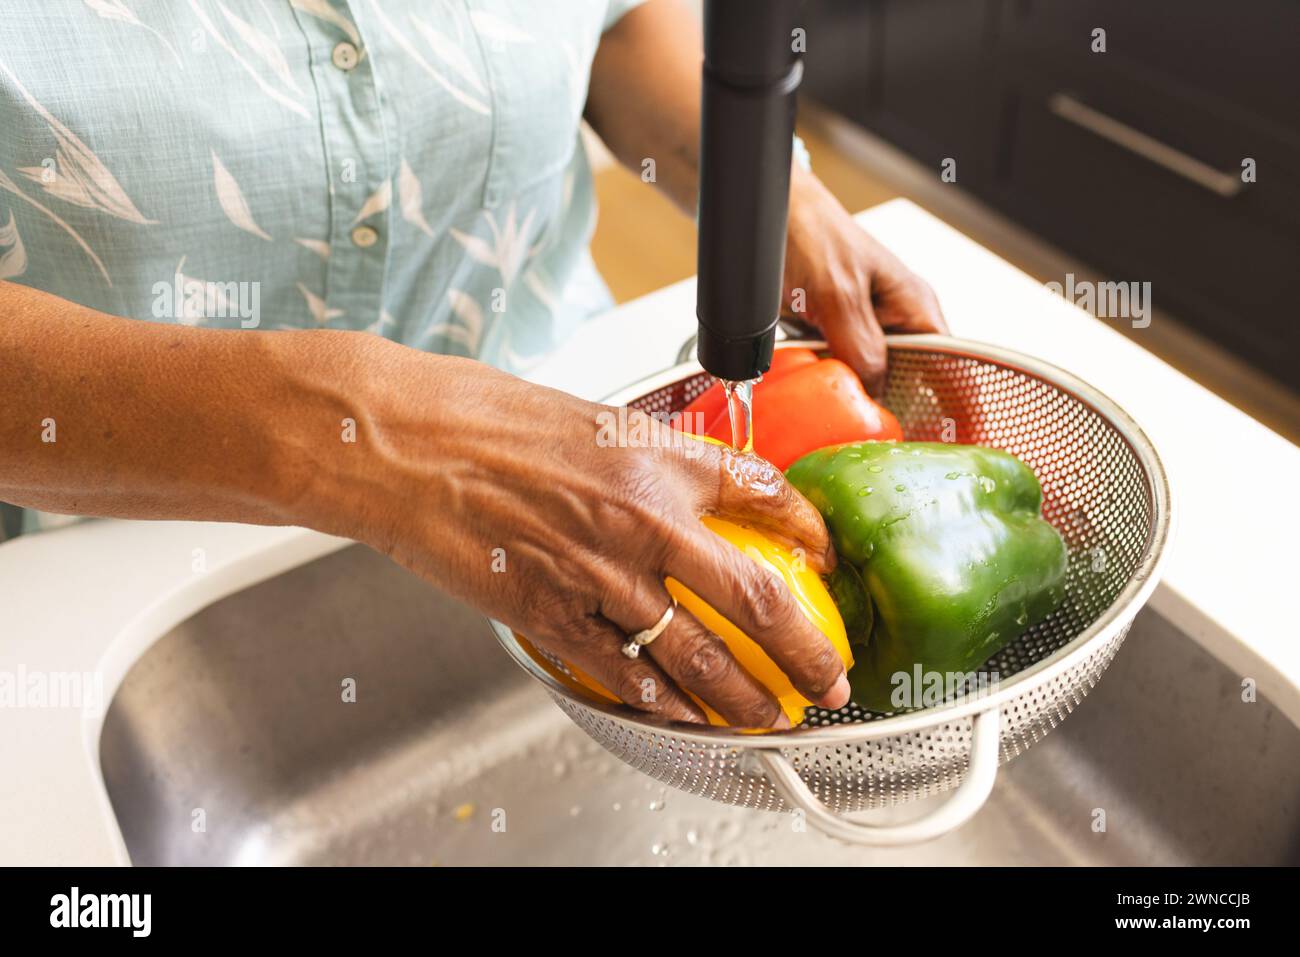 Senior biracial woman washes colorful bell peppers under a kitchen faucet Stock Photo